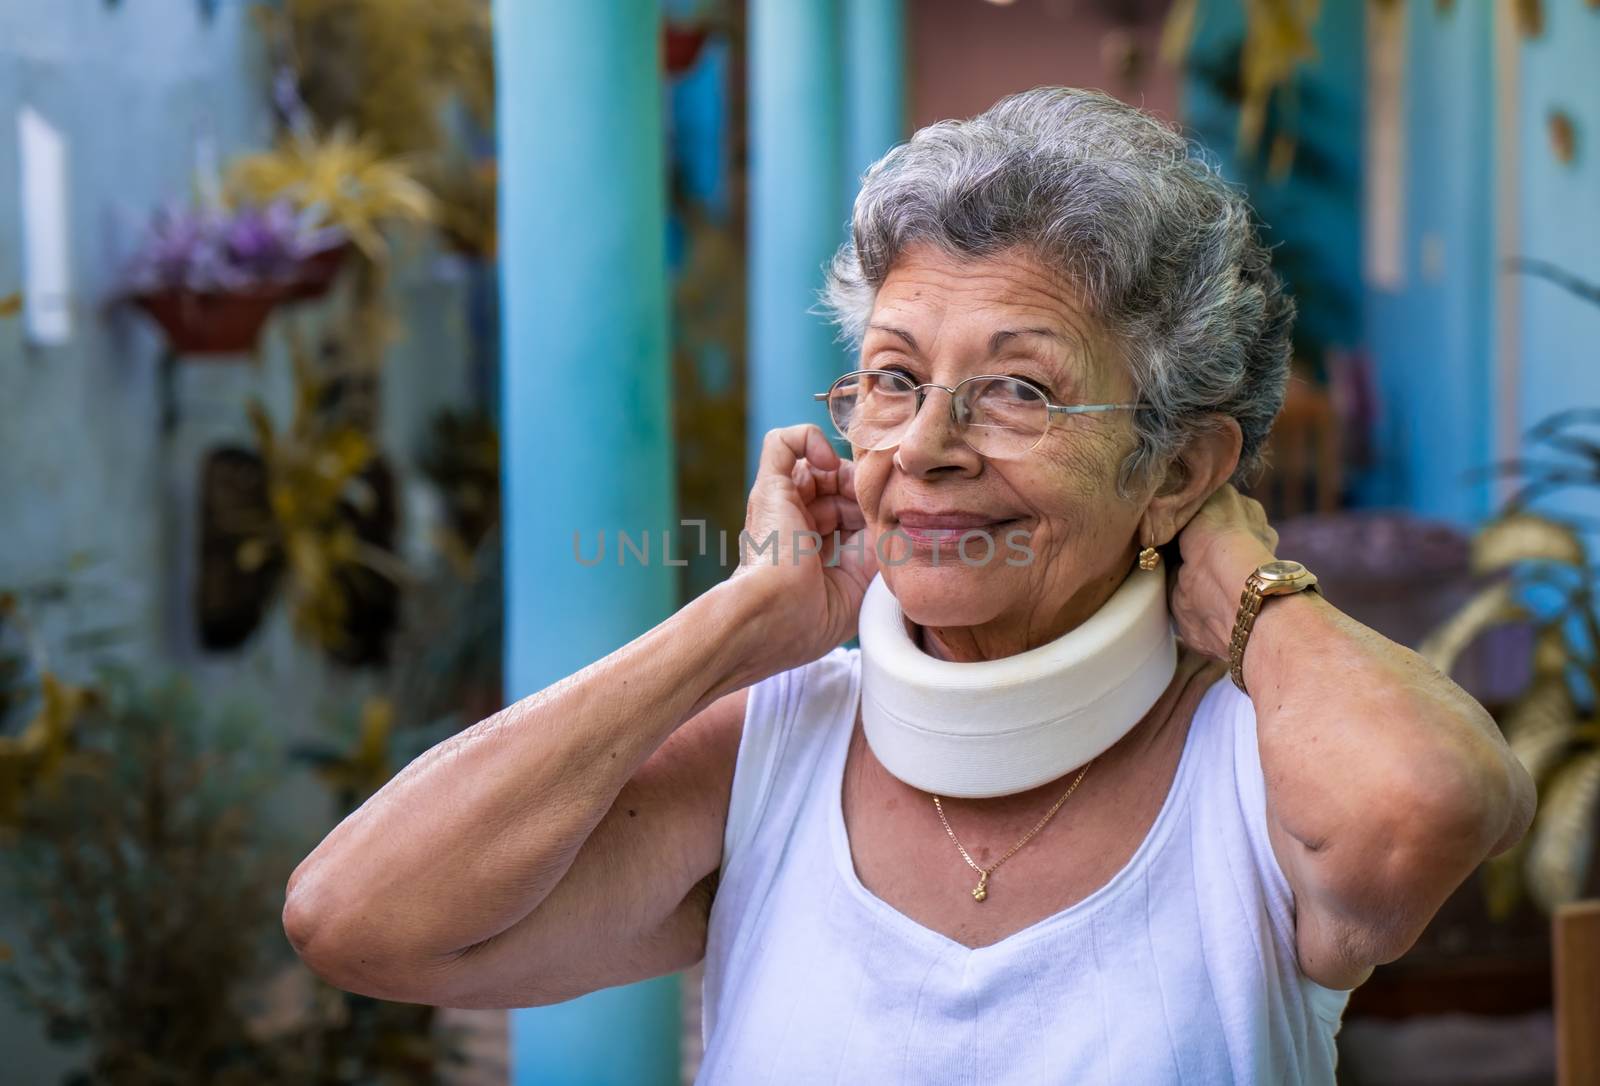 Smiling elderly woman putting on homemade looking cervical immobilizer collar